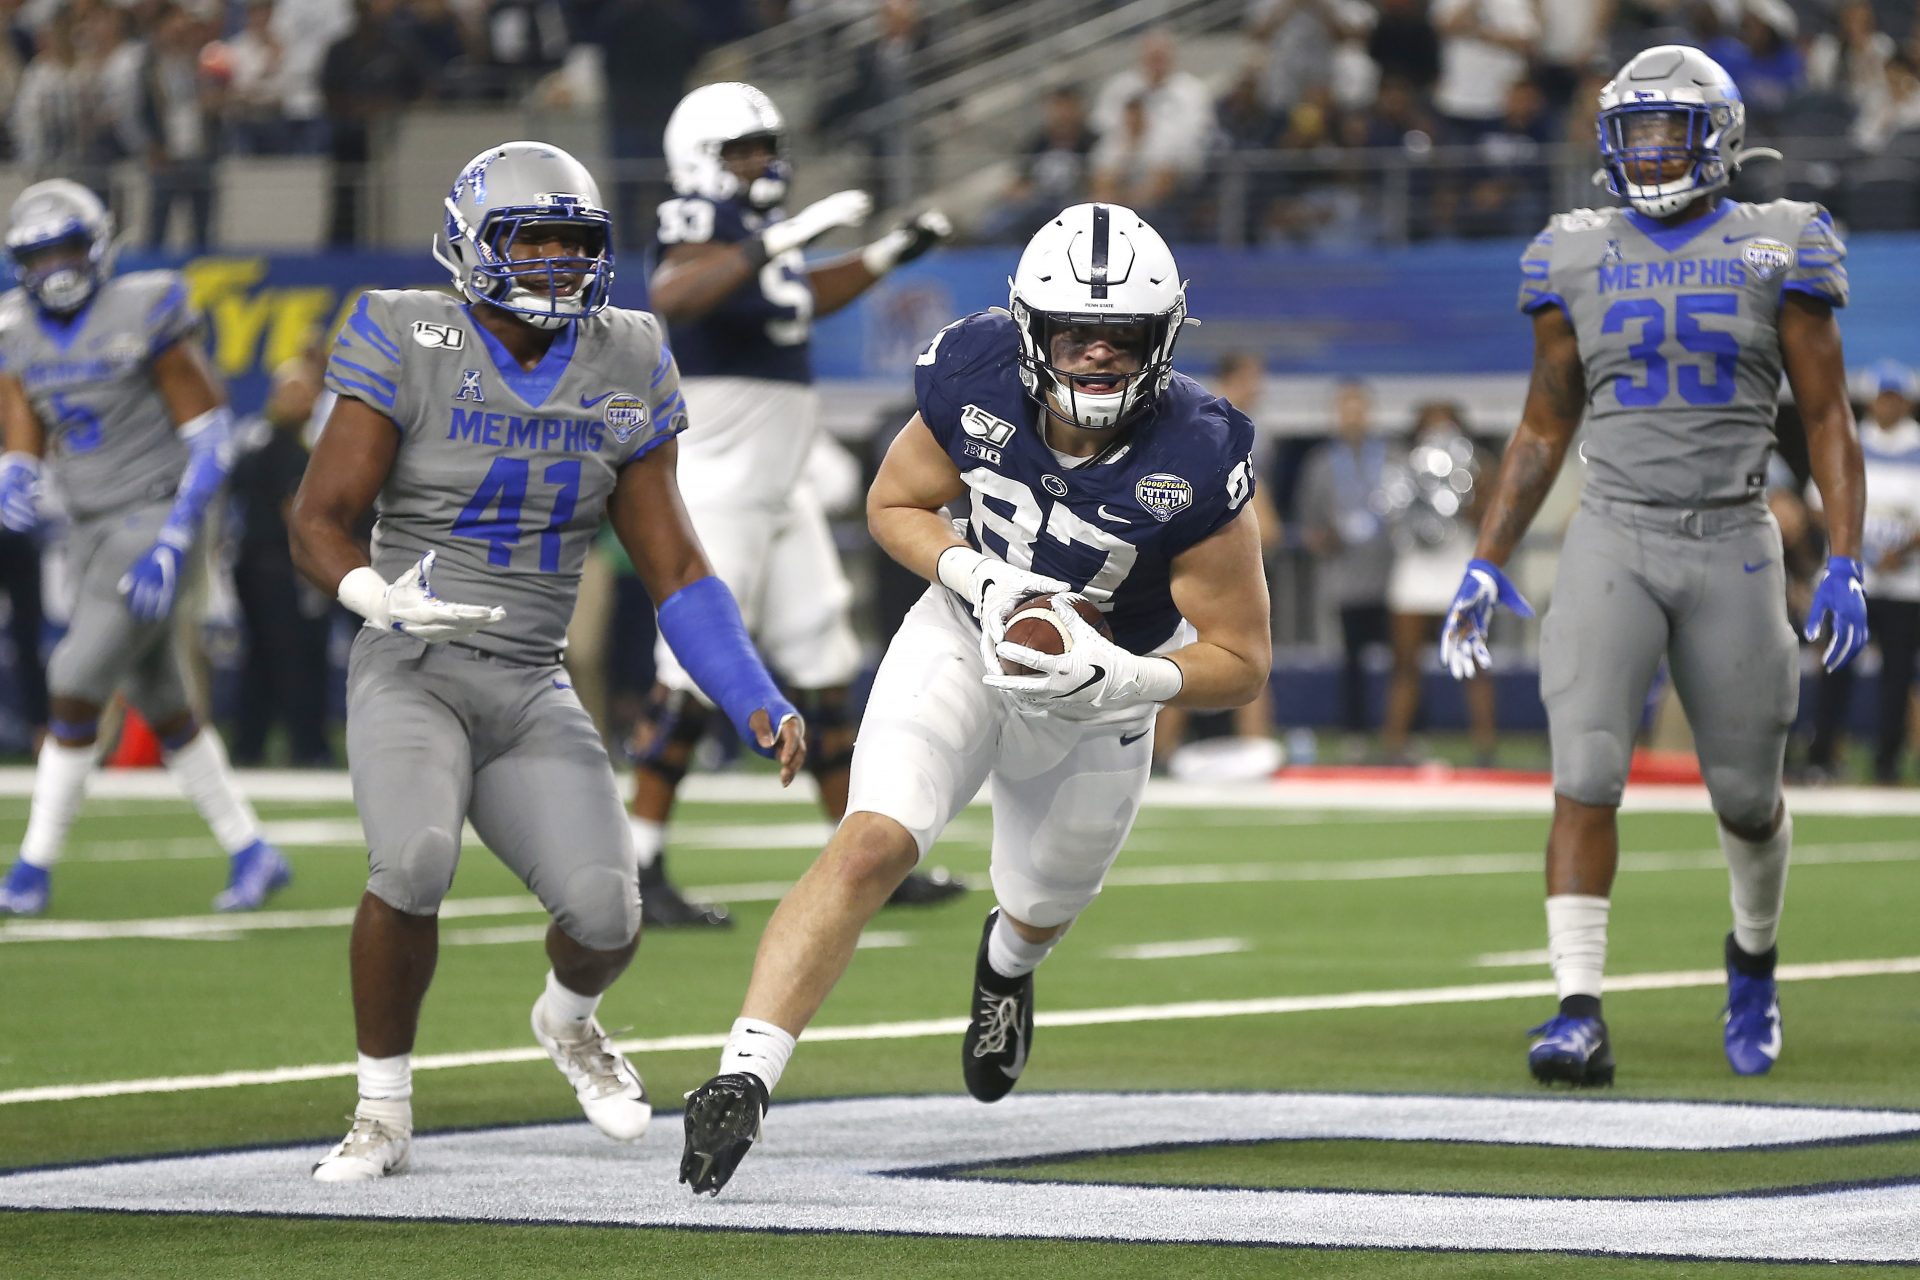 Penn State tight end Pat Freiermuth (87) catches a pass for a two point conversion as Memphis defensive back Sanchez Blake Jr. (41) and linebacker Tim Hart (35) look on in the second half of the NCAA Cotton Bowl college football game, Saturday, Dec. 28, 2019, in Arlington, Texas. Penn State won 53-39.